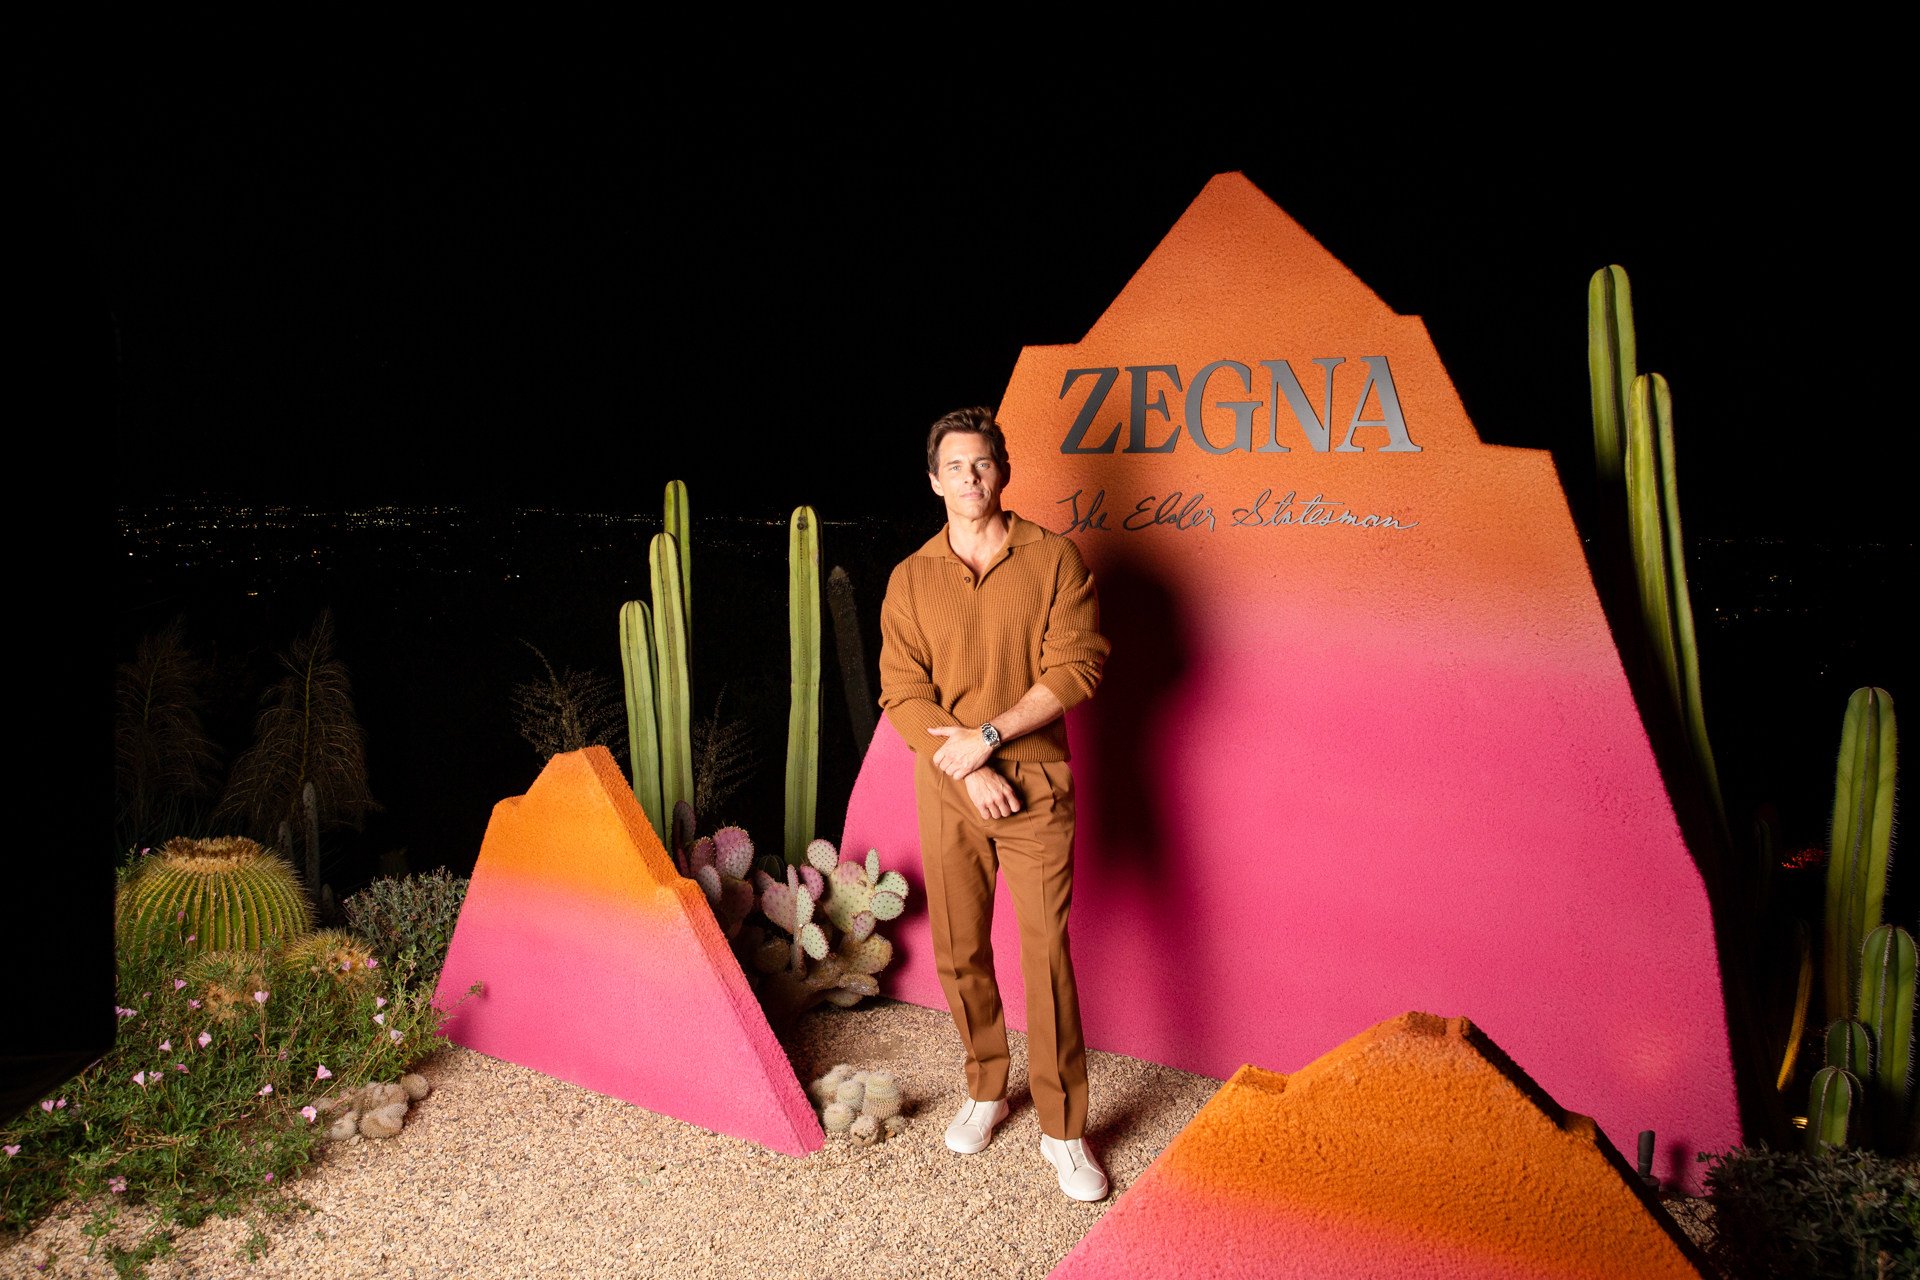 Actor James Mardsen at the unveiling of a collaborative collection between Italian brand Zegna and Los Angeles-based label The Elder Statesman in Los Angeles. Photos: Handout